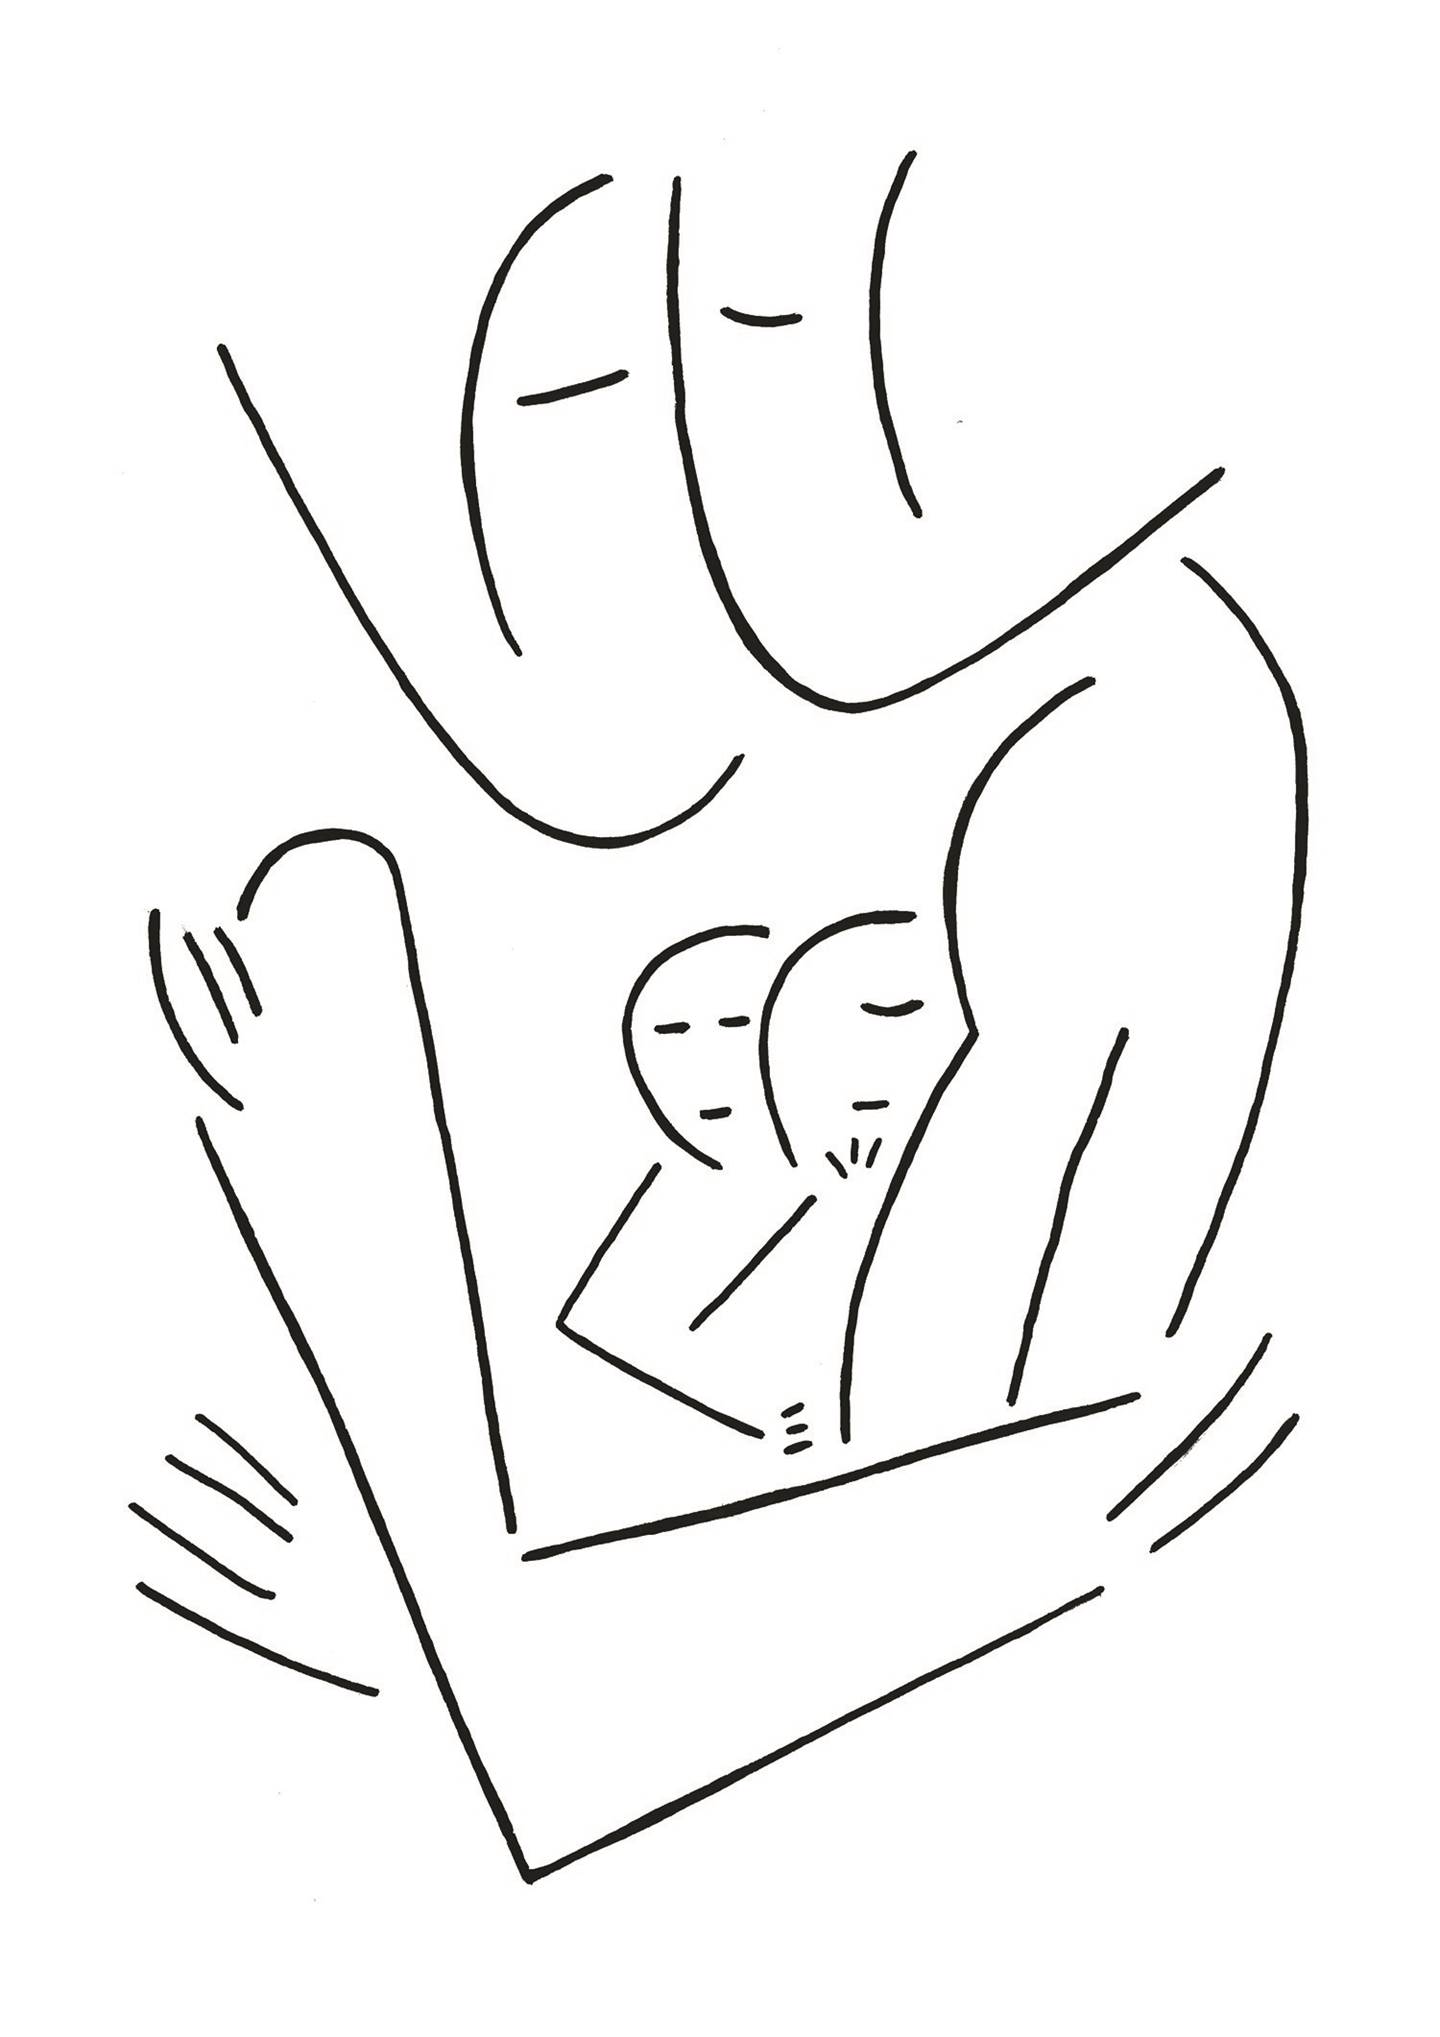 Família II, original Human Figure Paper Drawing and Illustration by Inês  Sousa Cardoso